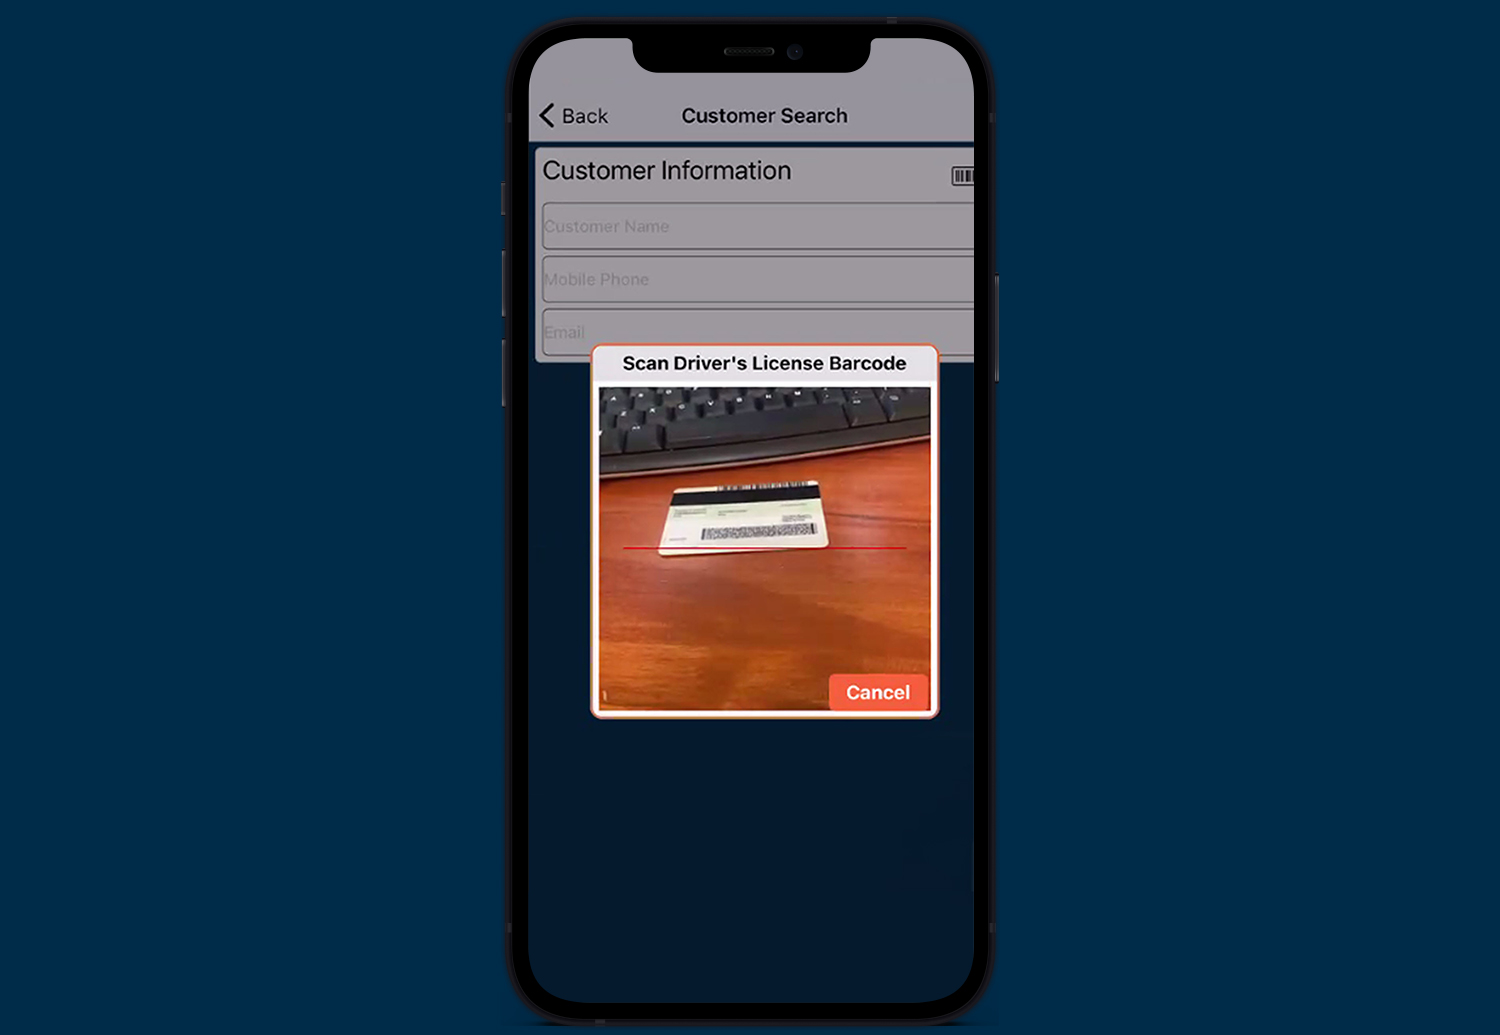 A smartphone with the Lightspeed Mobile app pulled up on the Customer Search "Scan Driver's License Barcode" tab